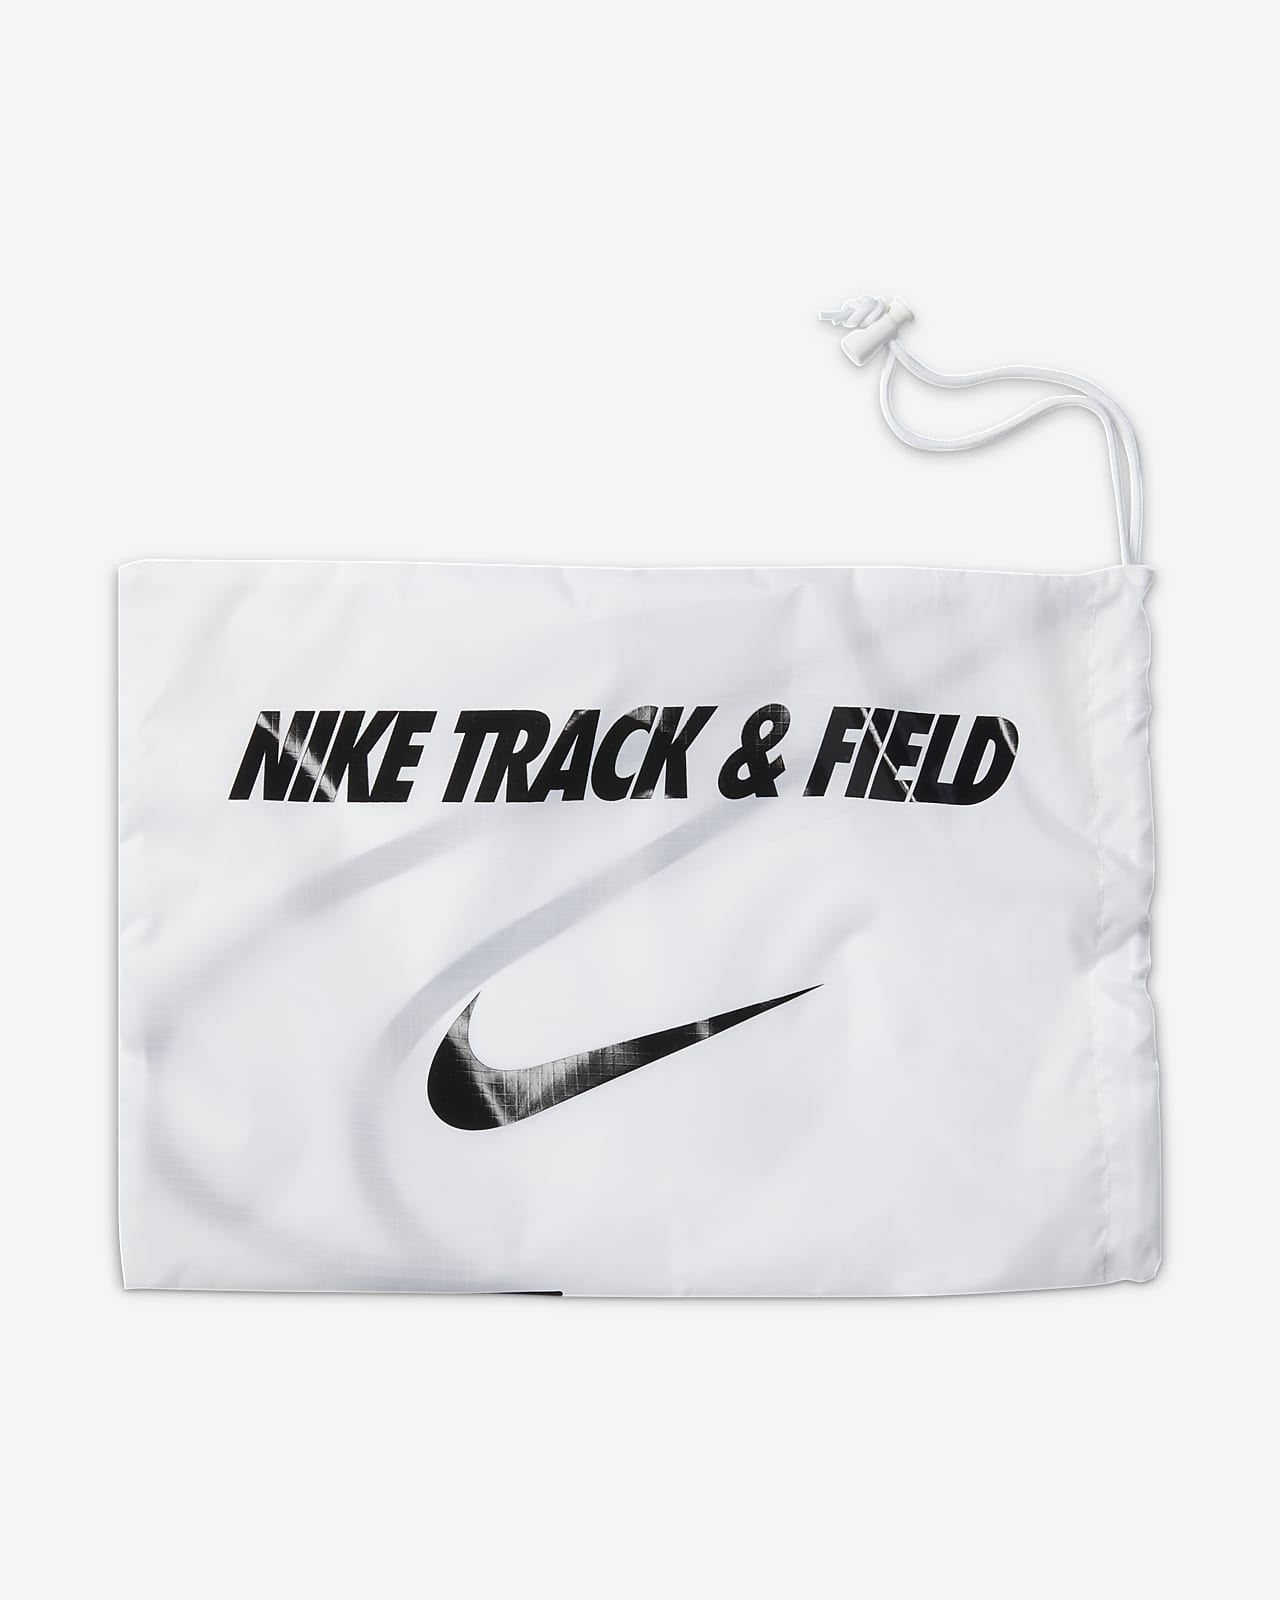 Nike SD 4 Track & Field Throwing Shoes.